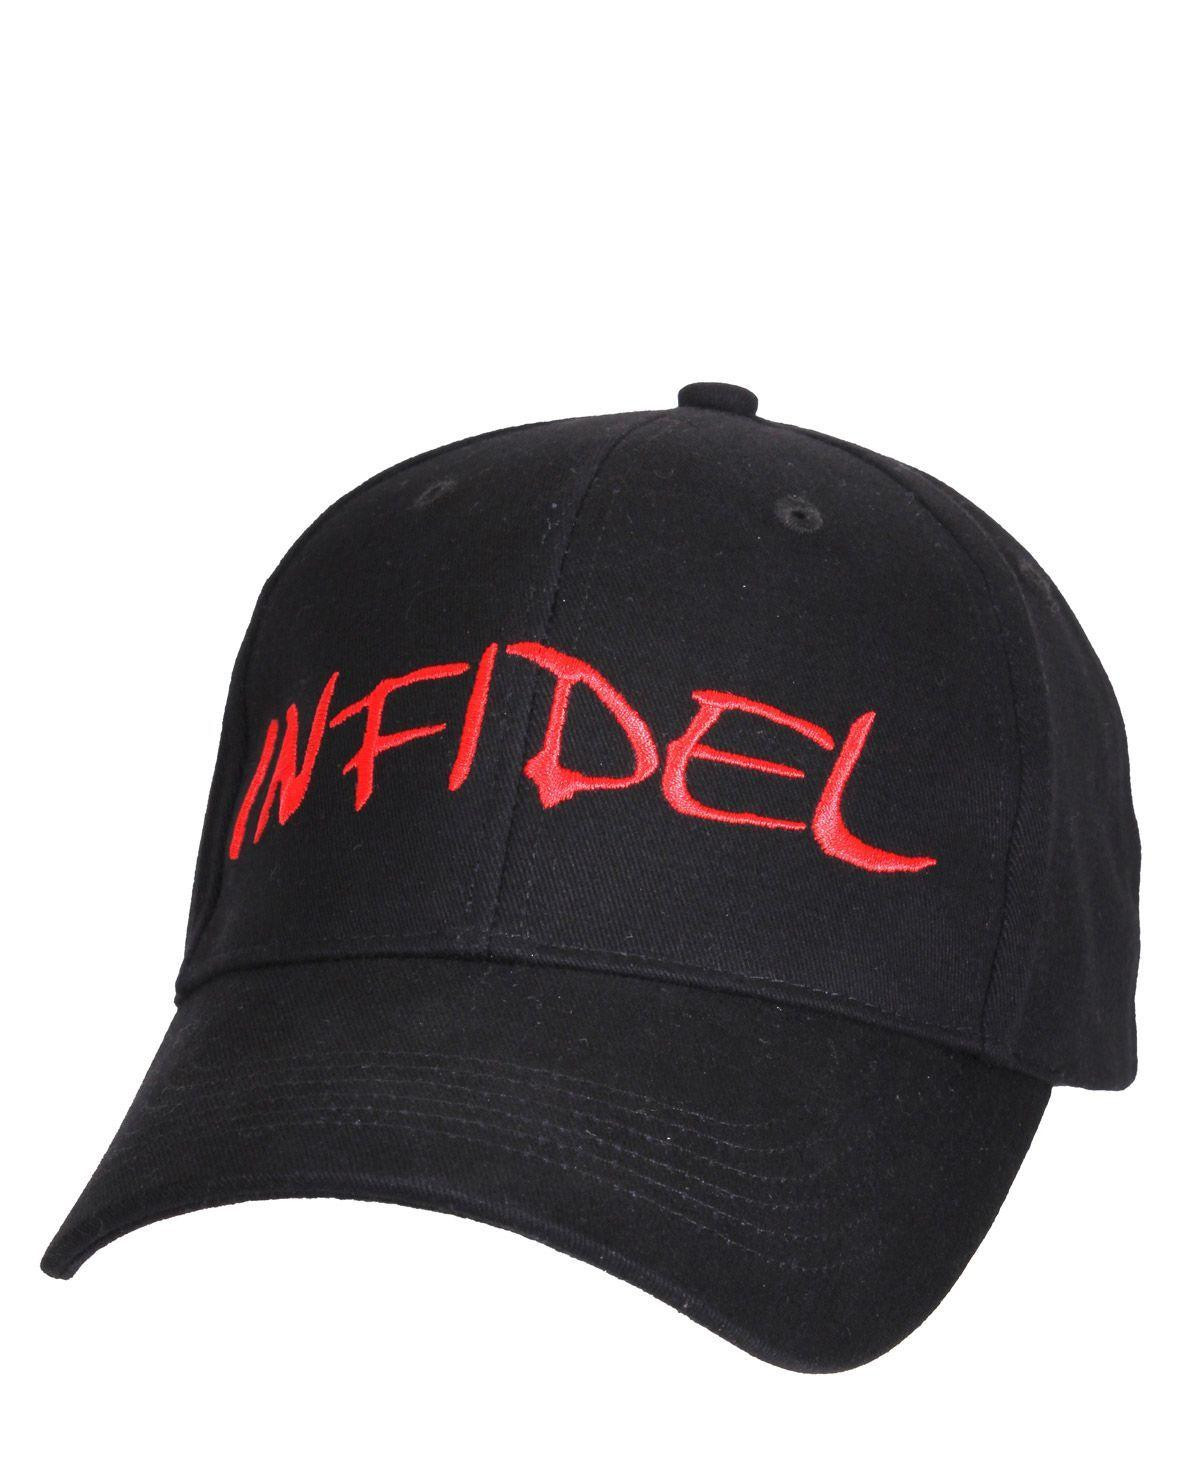 Rothco Deluxe Low Profile Cap - 'Infidel' (Sort, One Size)